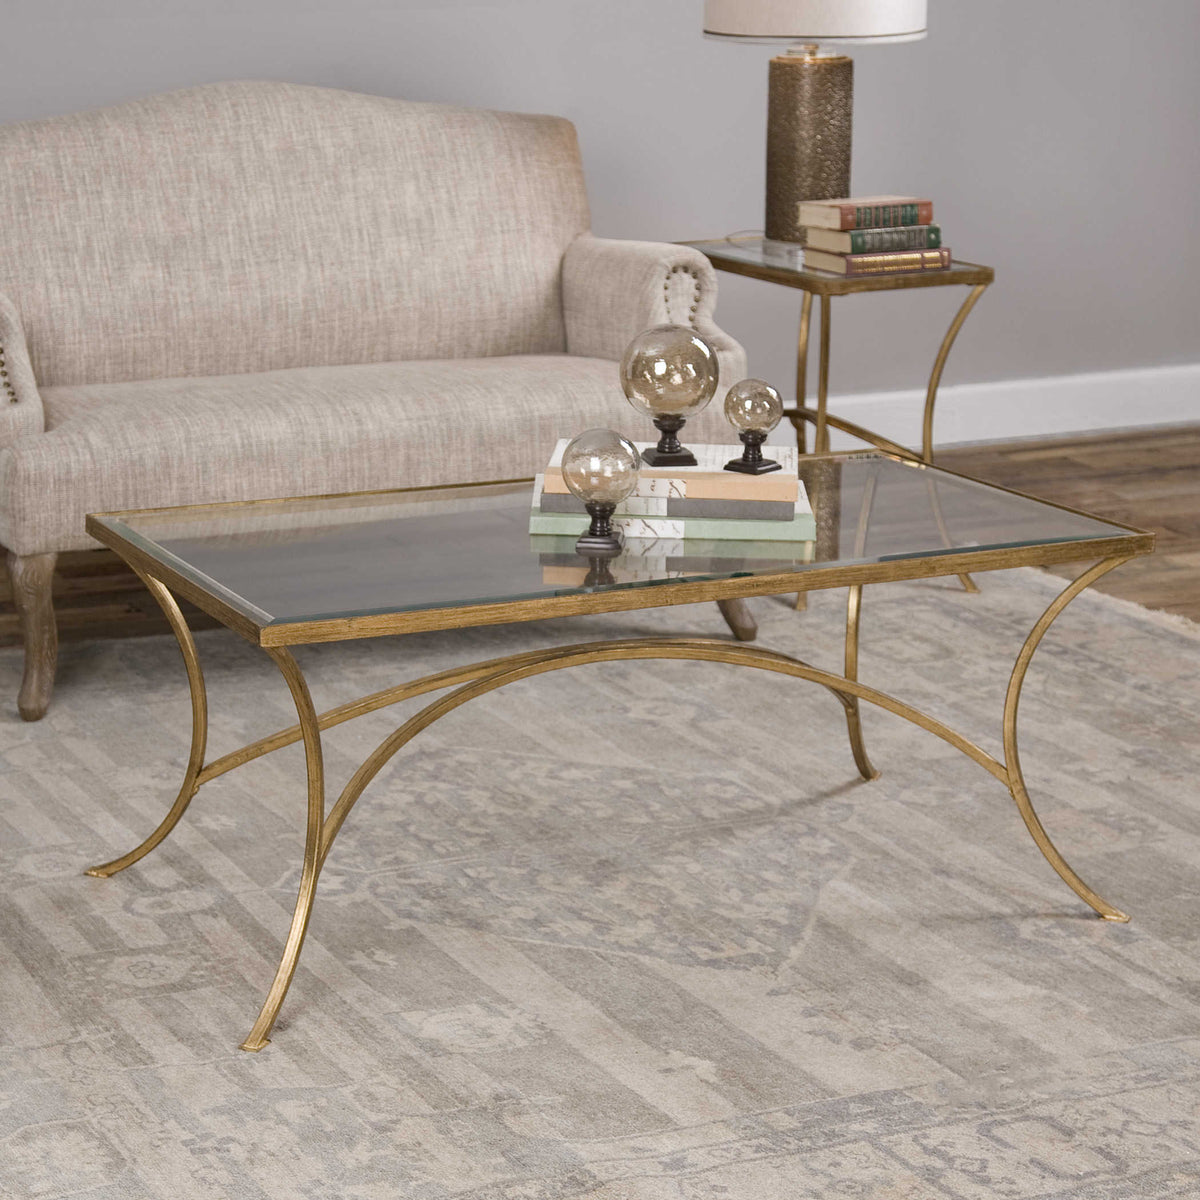 Uttermost Alayna Gold Coffee Table